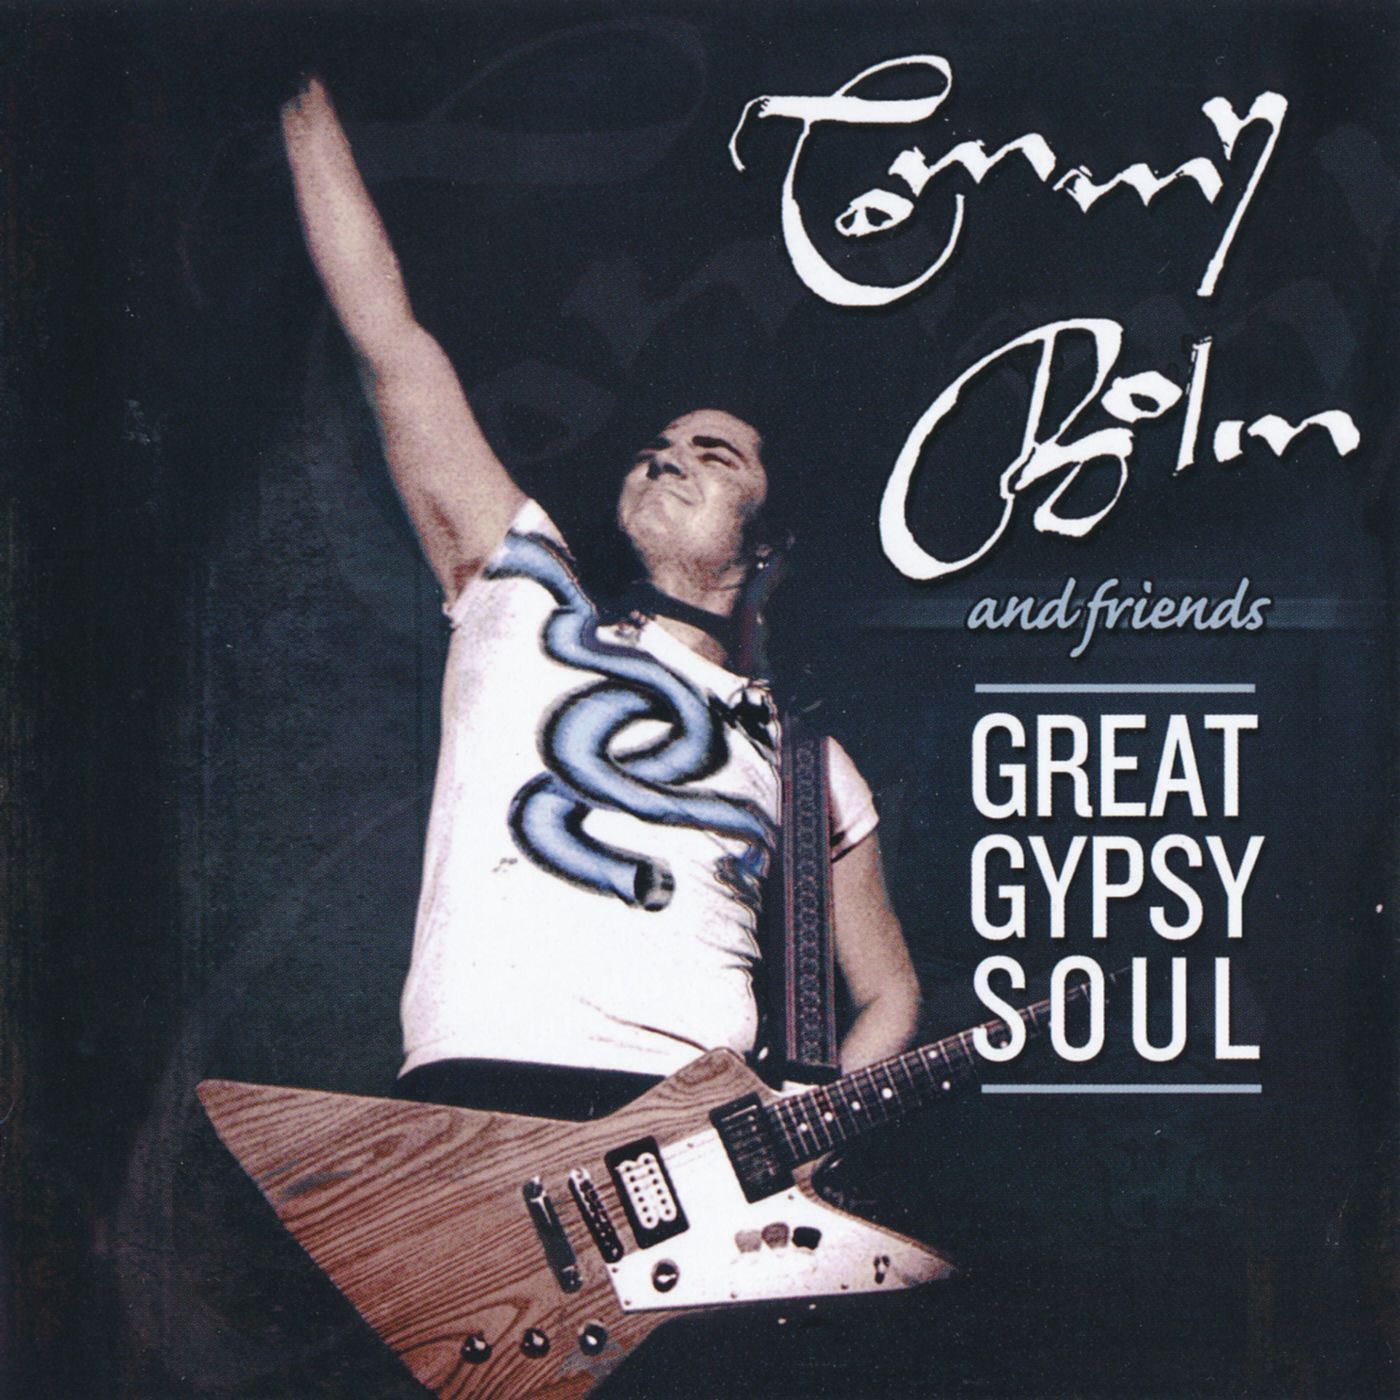 Tommy Bolin and Friends - Great Gypsy Soul